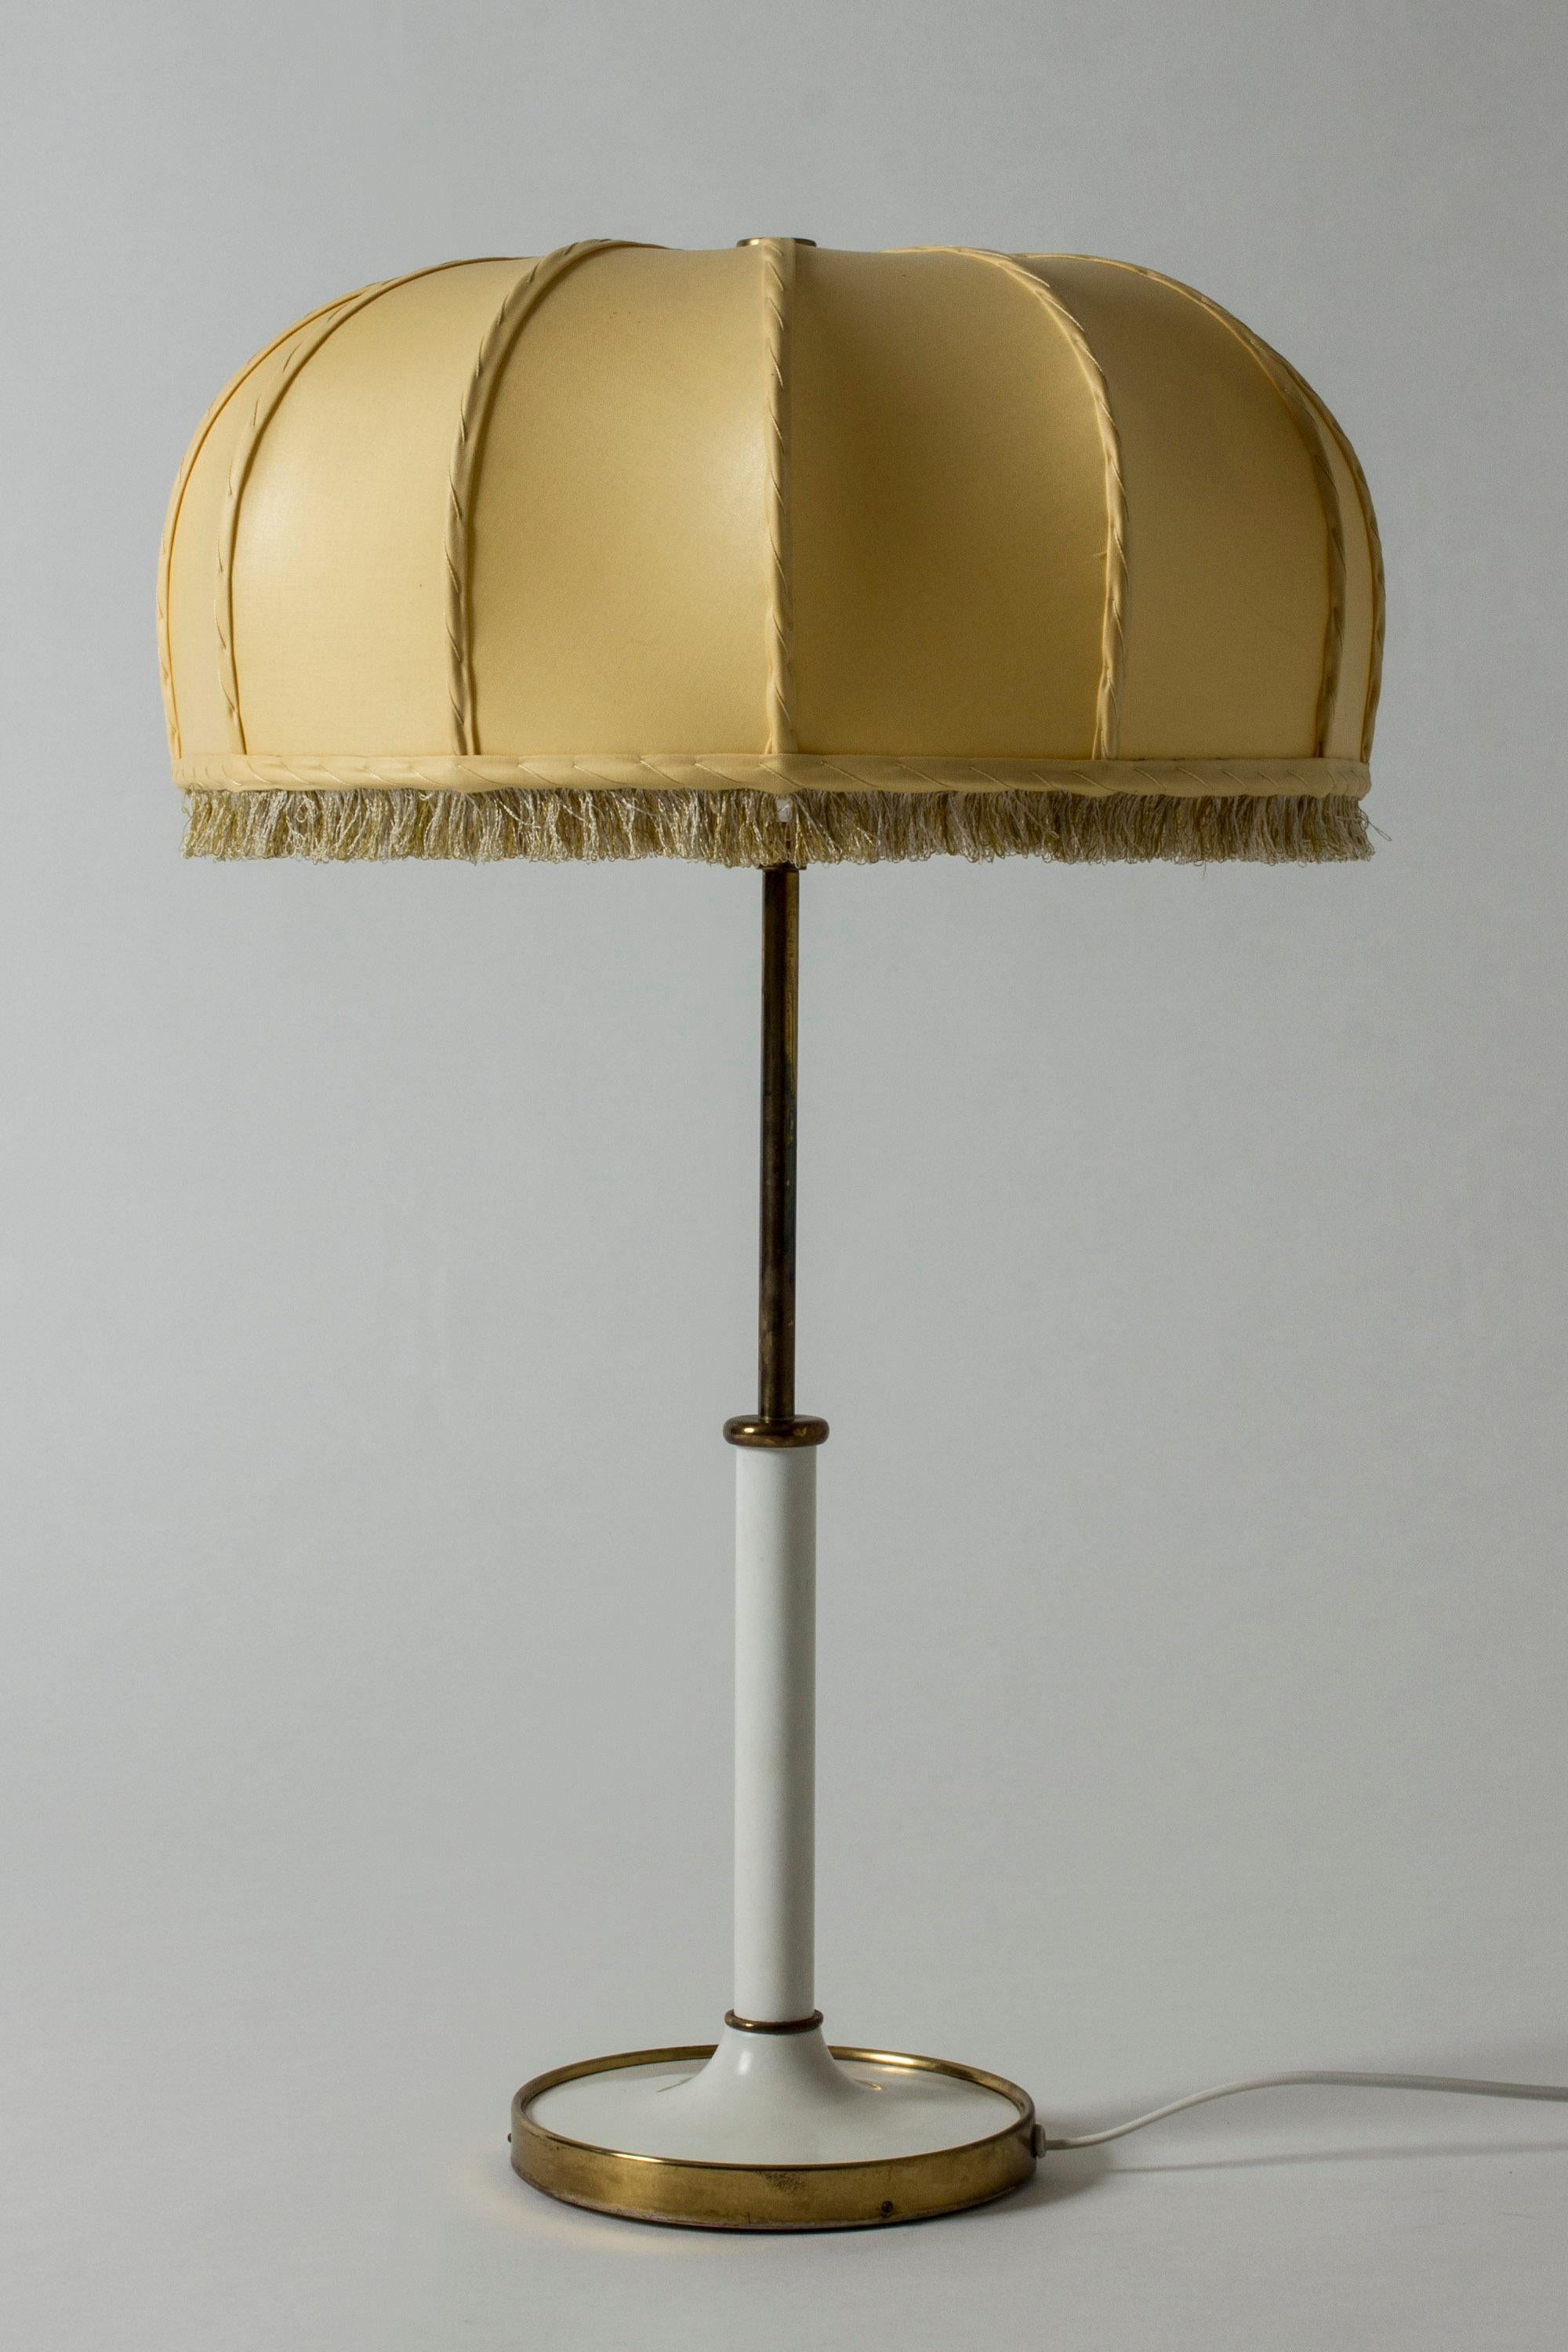 Beautiful table lamp by Josef Frank, model 2466. White lacquered metal base with a brass ring around the foot. Original billowy lamp shade with fringe around the edge.